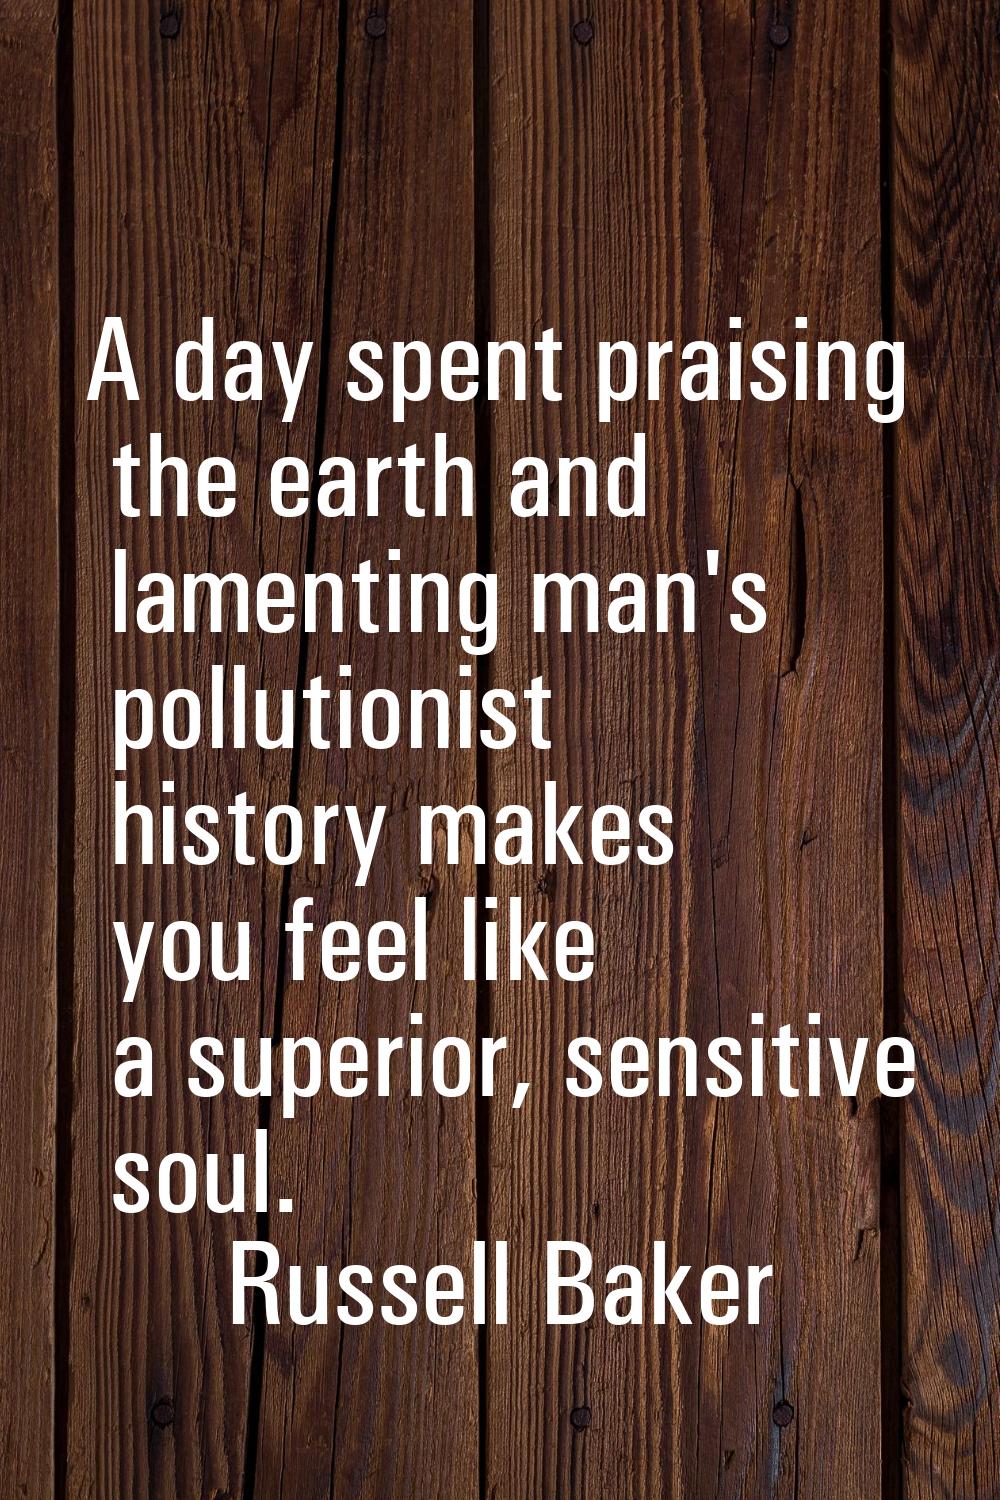 A day spent praising the earth and lamenting man's pollutionist history makes you feel like a super